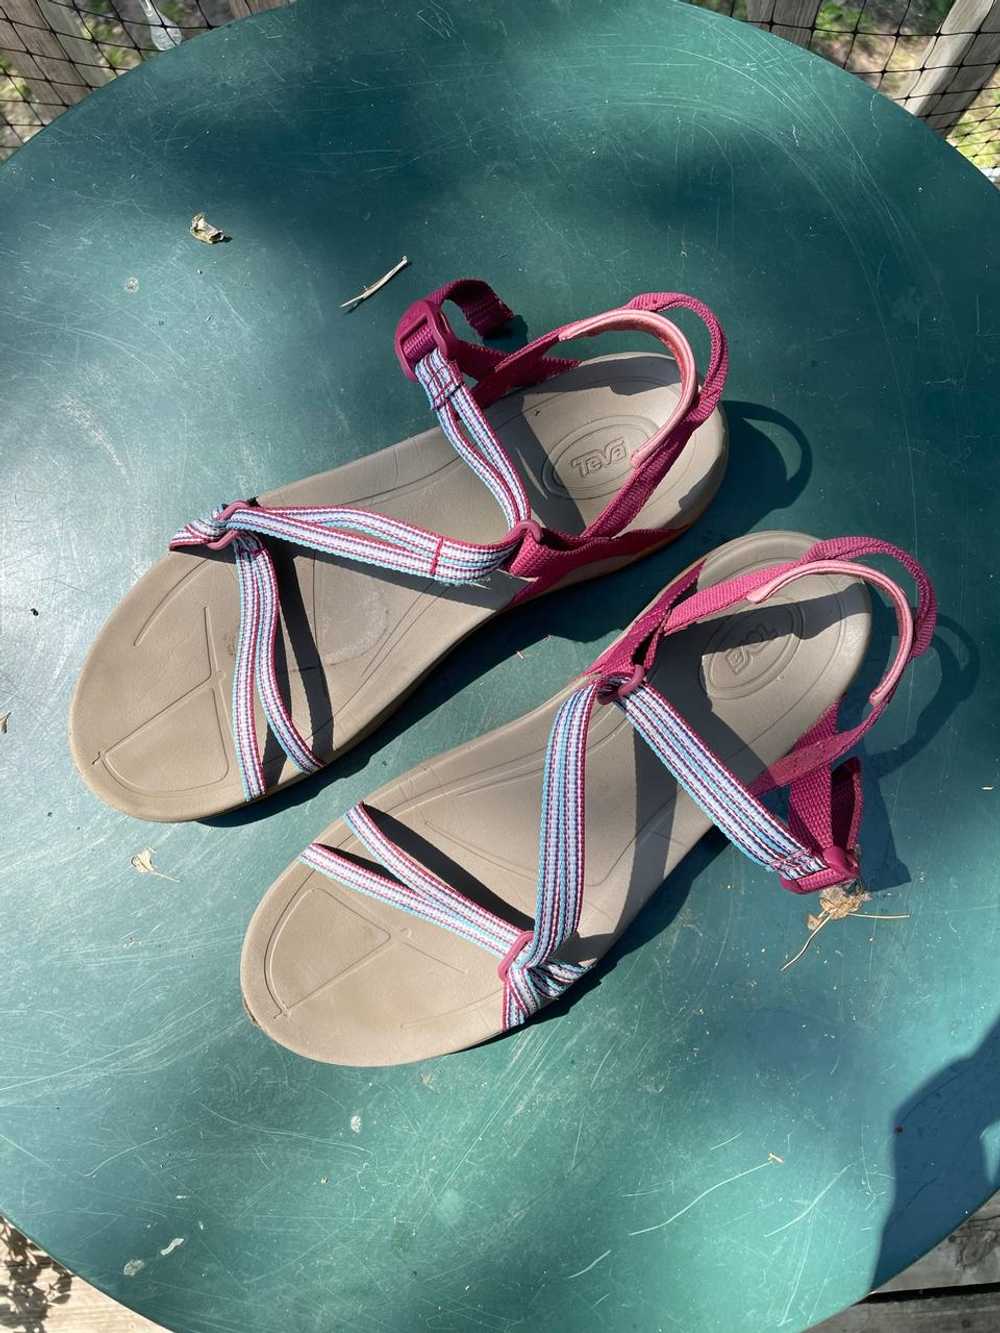 Teva Sandals (11) | Used, Secondhand, Resell - image 2